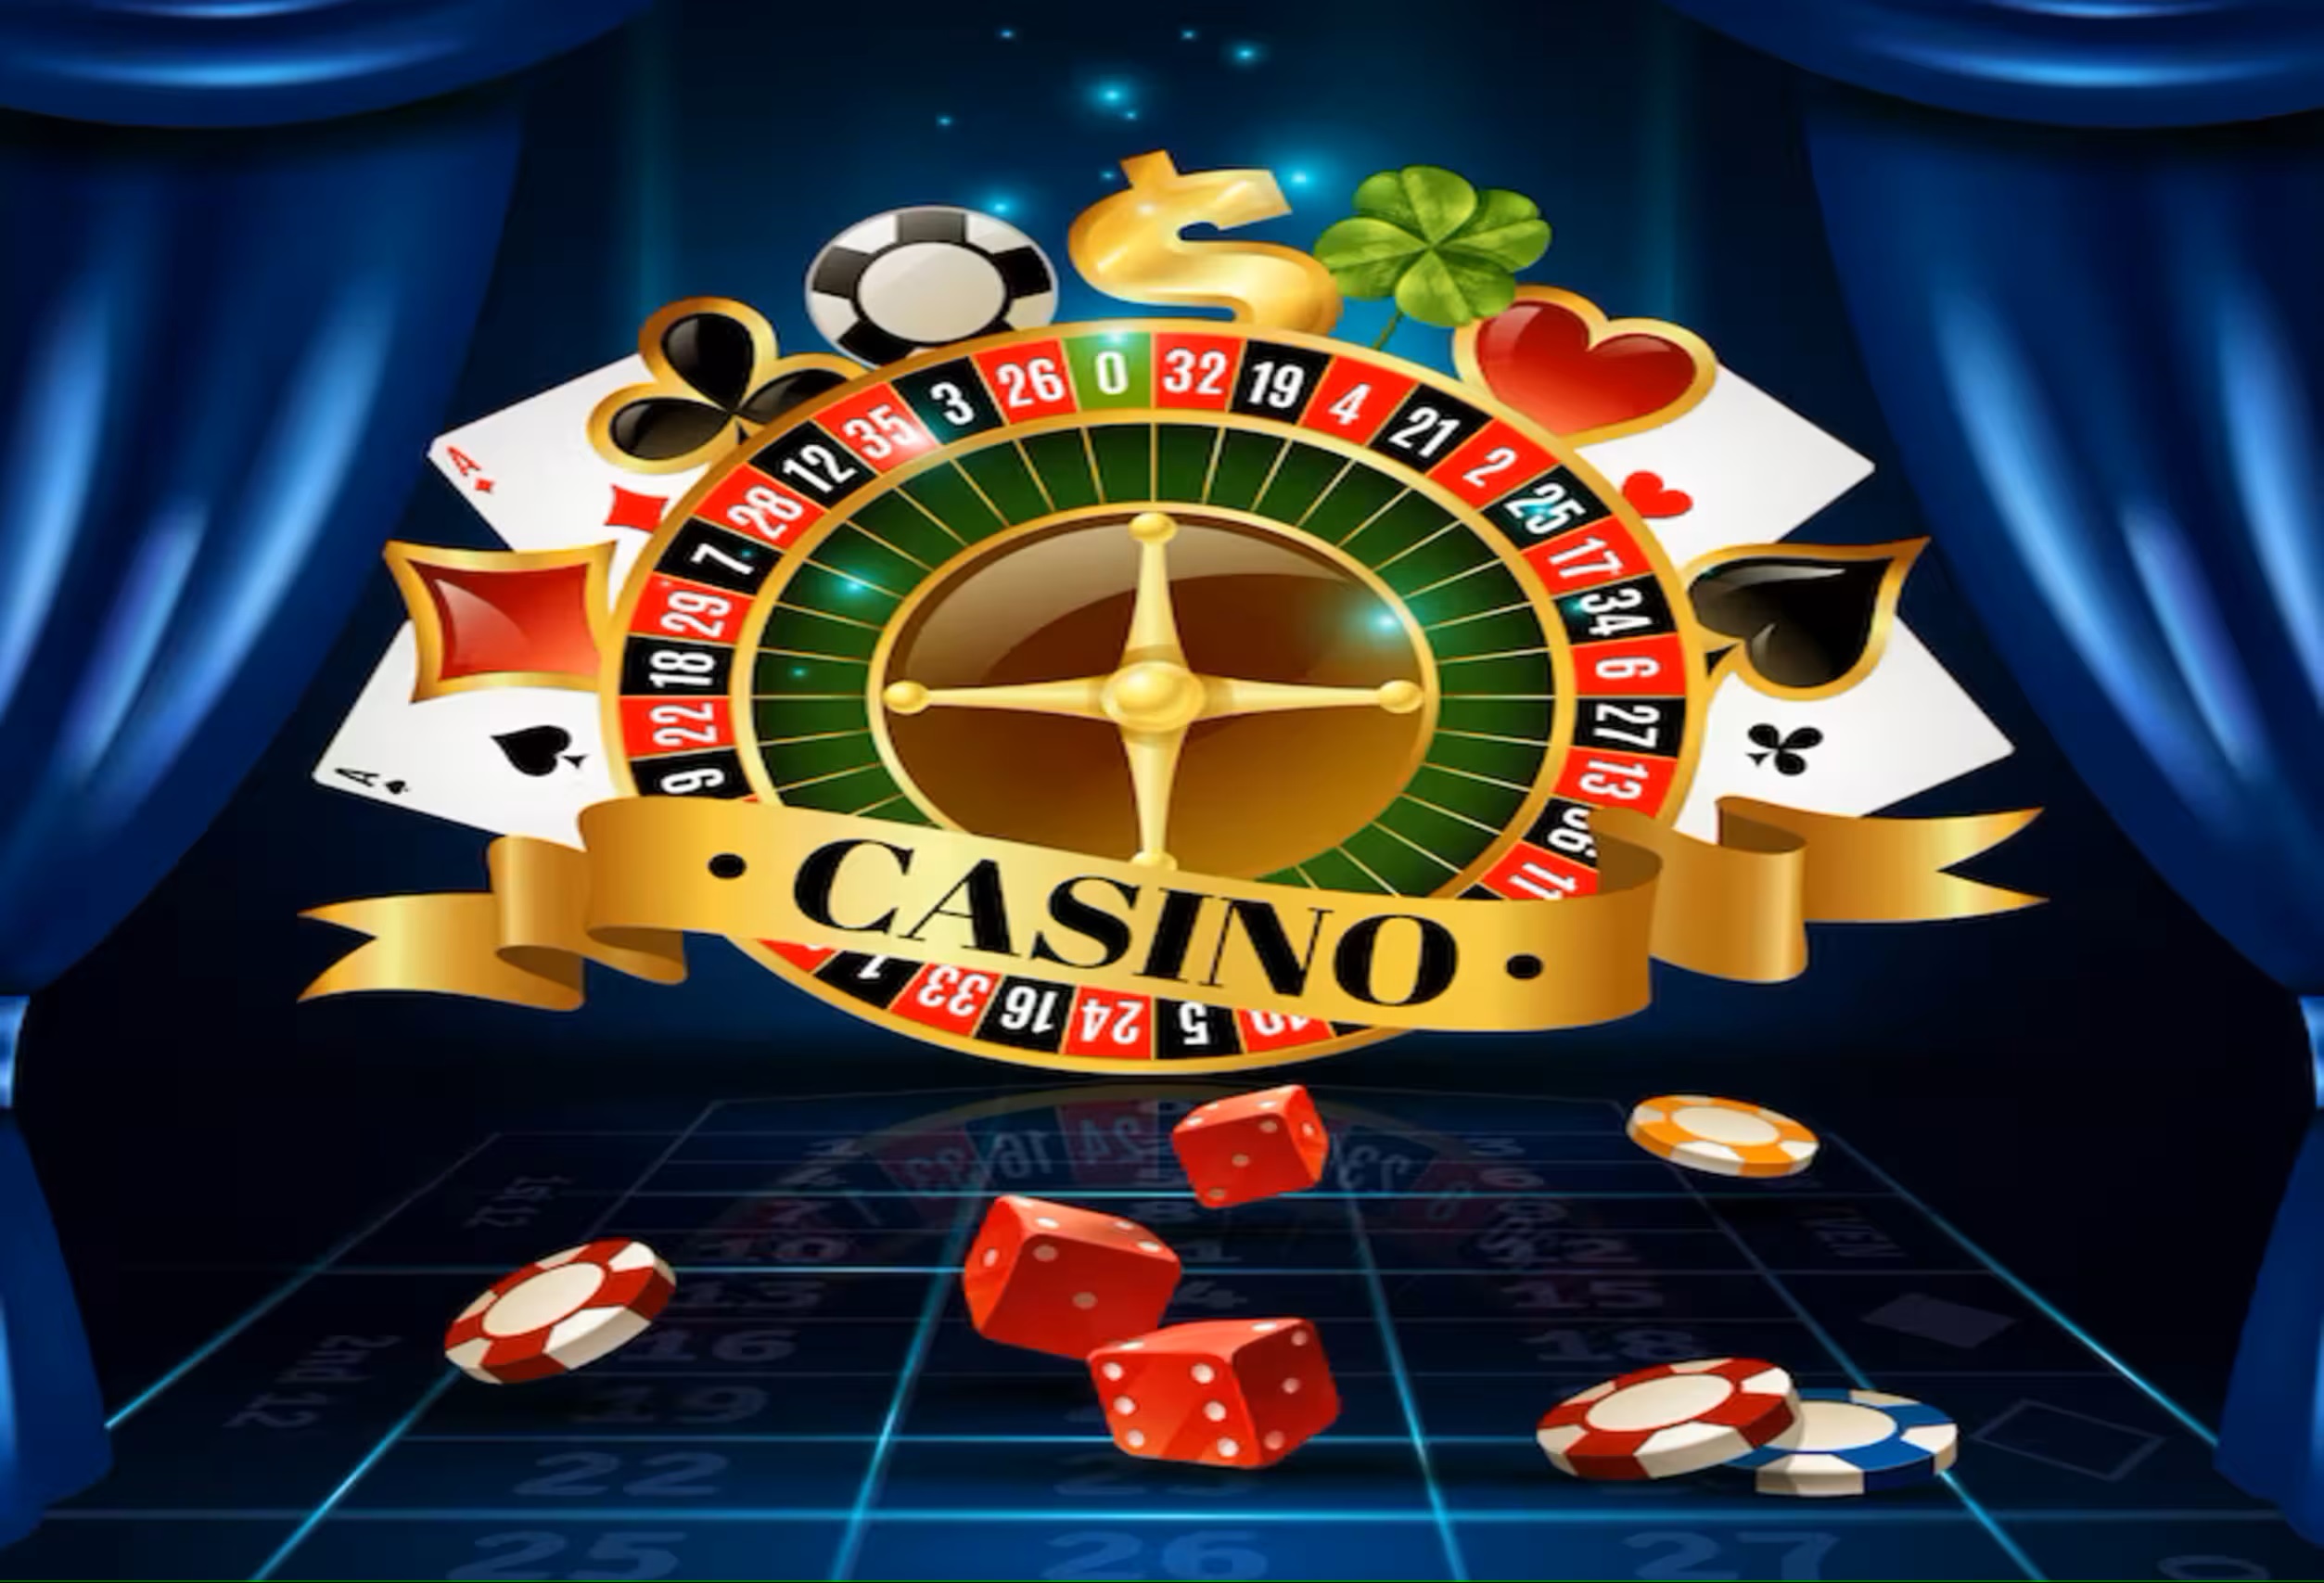 Live Casino vs. Traditional Casinos: Which Offers a Better Experience?